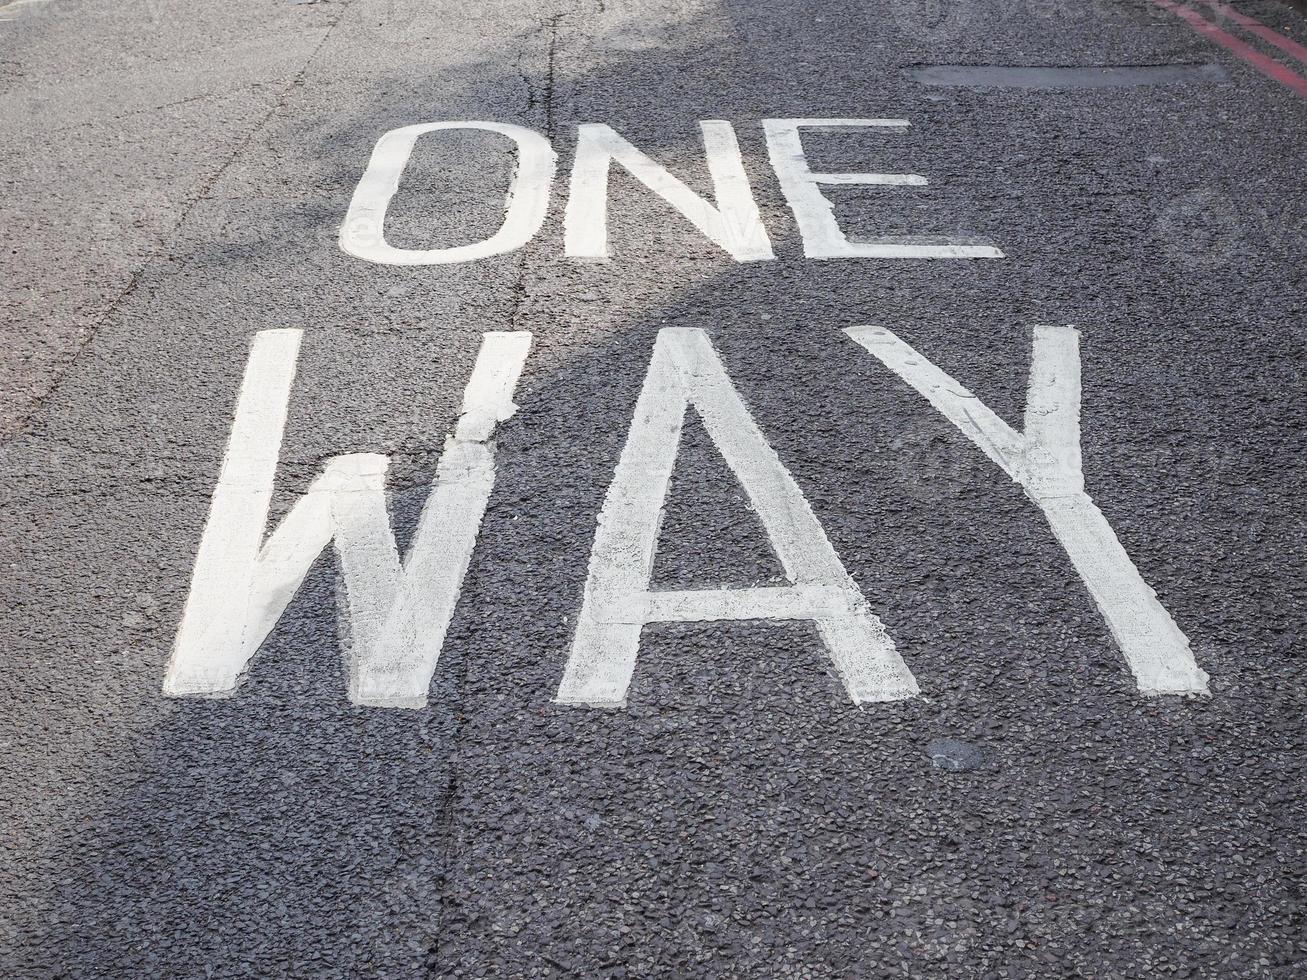 One way sign photo